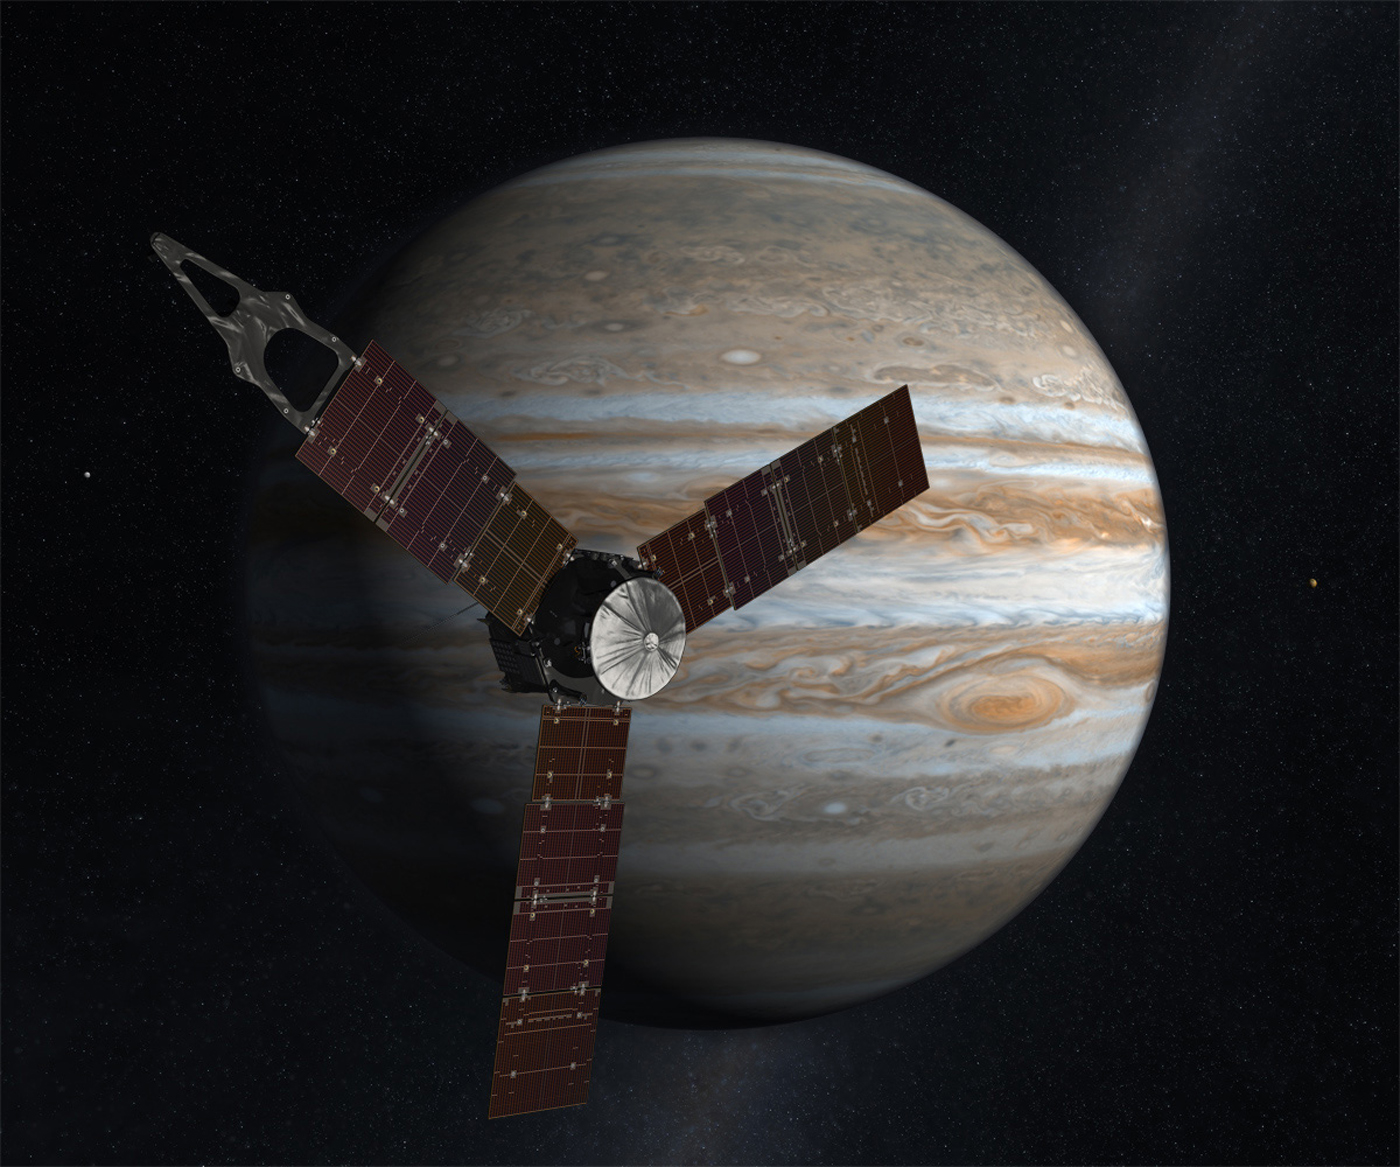 The Juno mission will arrive at Jupiter in 2016 for a year-long close-up study of the planet.